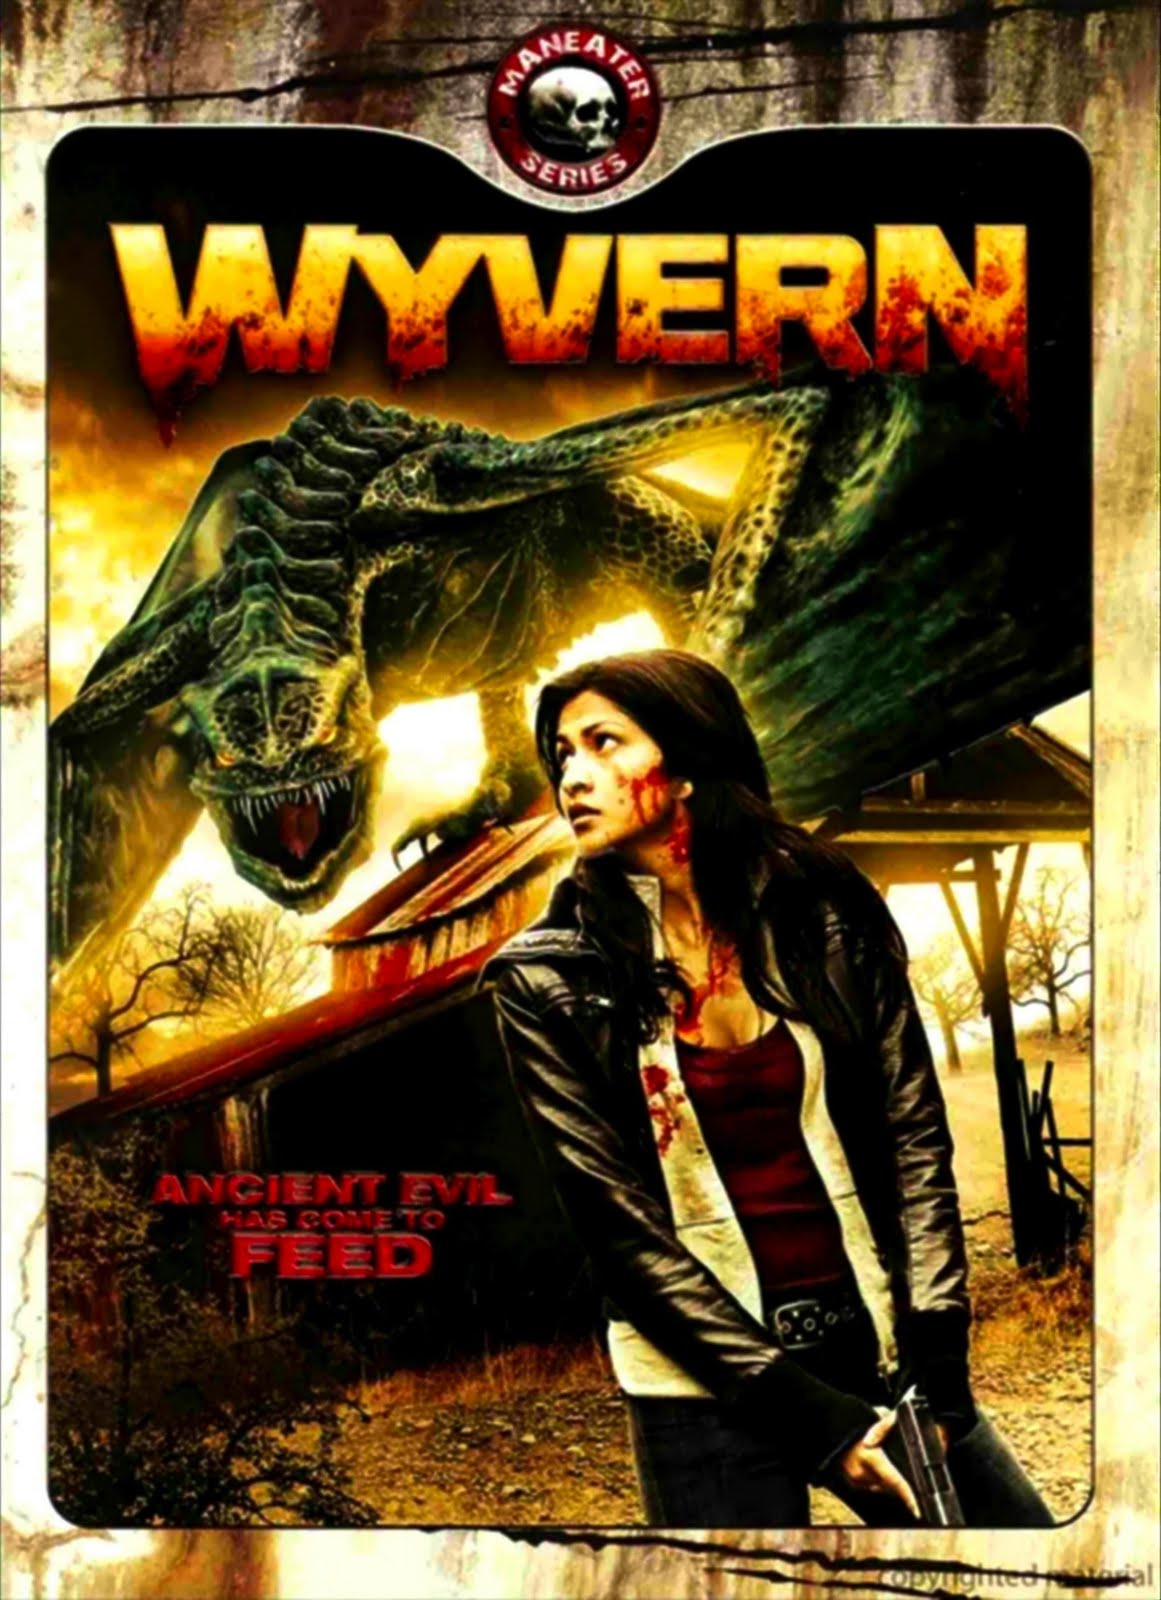 The image used on the DVD cover of wyvern. The title "Wyvern" is at the top in yellow and red text. Underneath it is a dragon on top of a barn and a woman with a gun. The bottom left conatins the tagline "Ancient evil has come to feed."